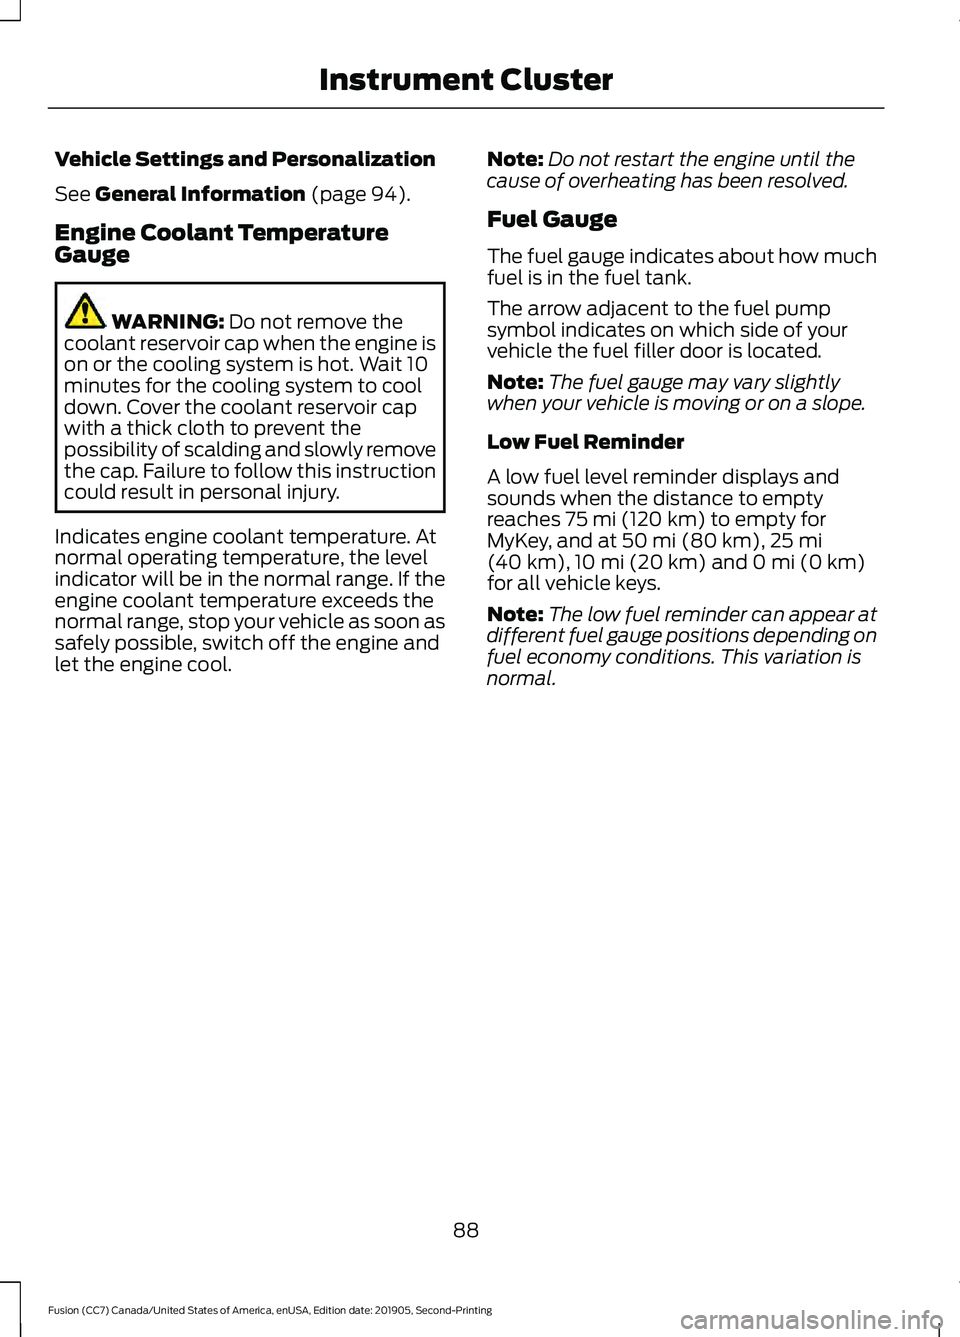 FORD FUSION 2020  Owners Manual Vehicle Settings and Personalization
See General Information (page 94).
Engine Coolant Temperature
Gauge WARNING: 
Do not remove the
coolant reservoir cap when the engine is
on or the cooling system i